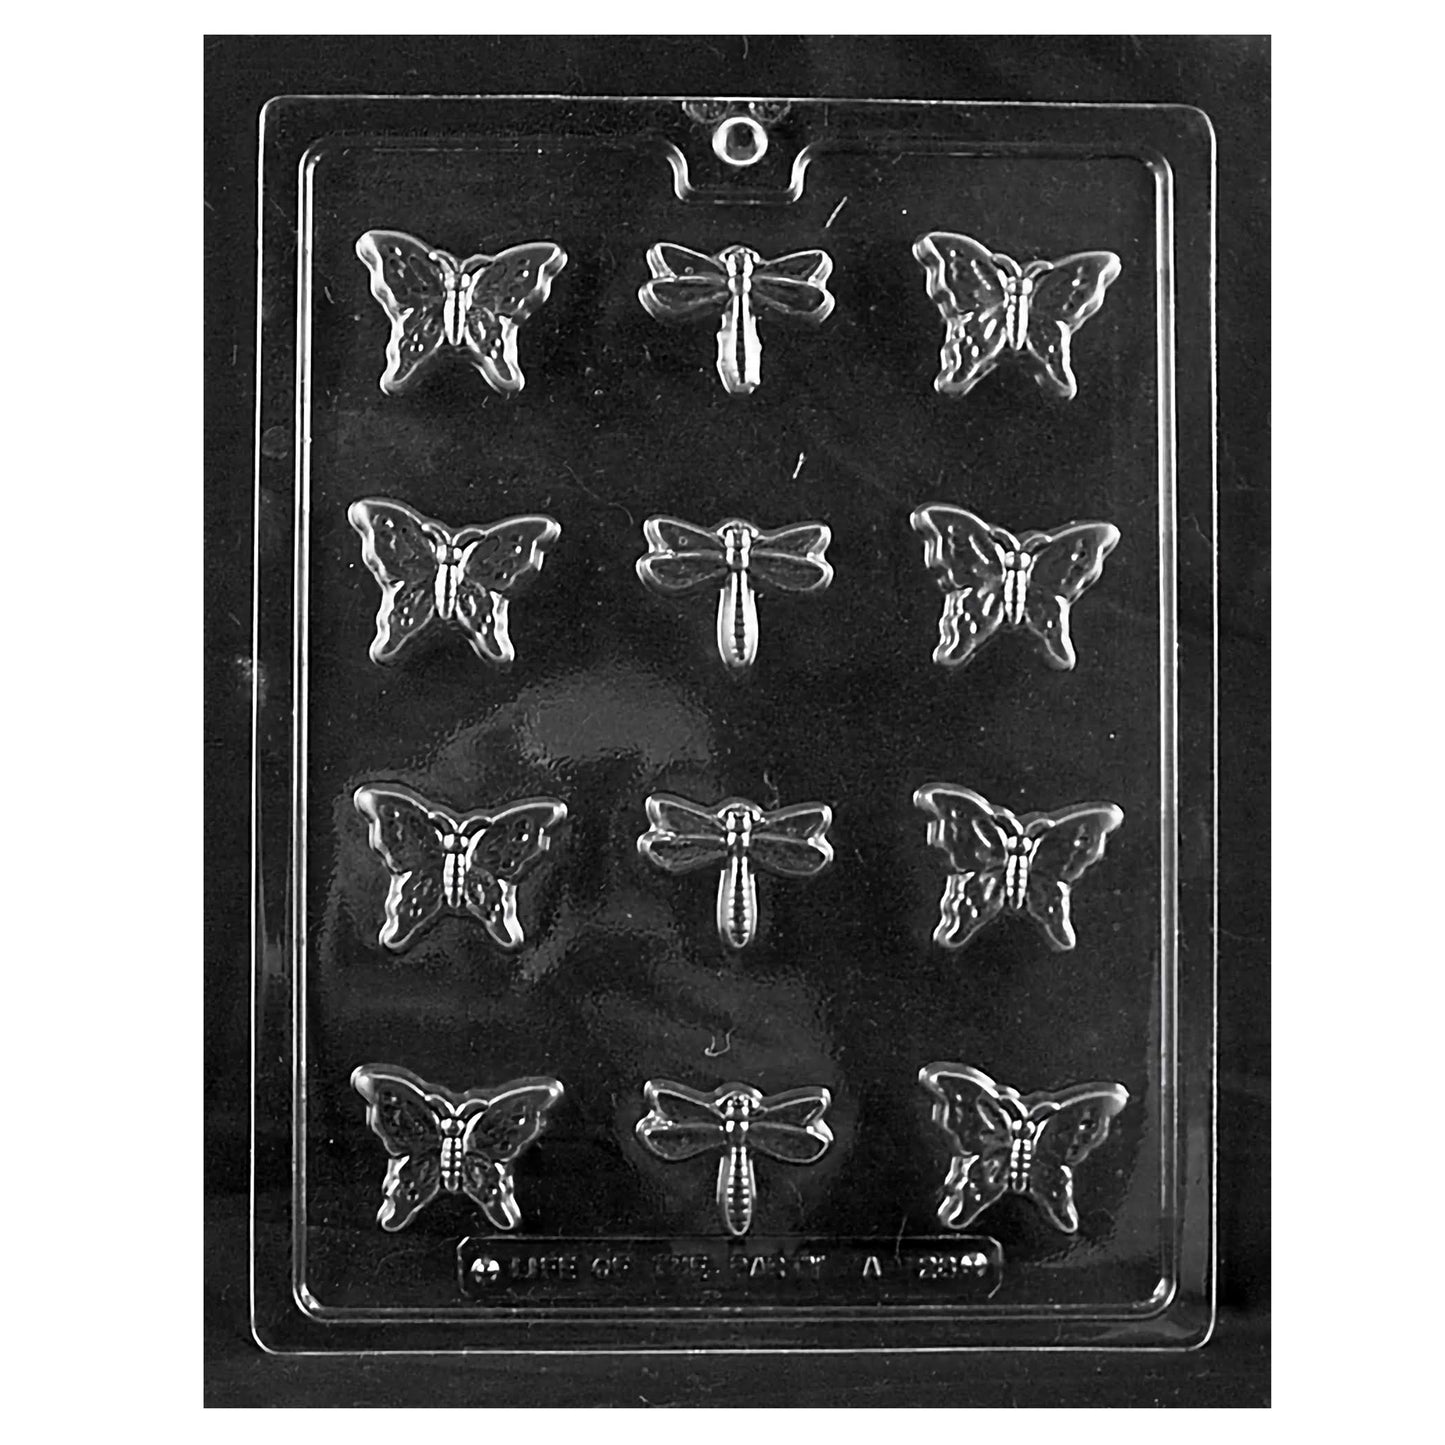 Chocolate mold designed to create bite-sized butterflies and dragonflies, perfect for garden-themed parties, spring events, or as a whimsical touch to any dessert spread. The mold features a variety of butterfly and dragonfly shapes, allowing for a charming assortment of chocolates that capture the delicate details of these enchanting creatures.